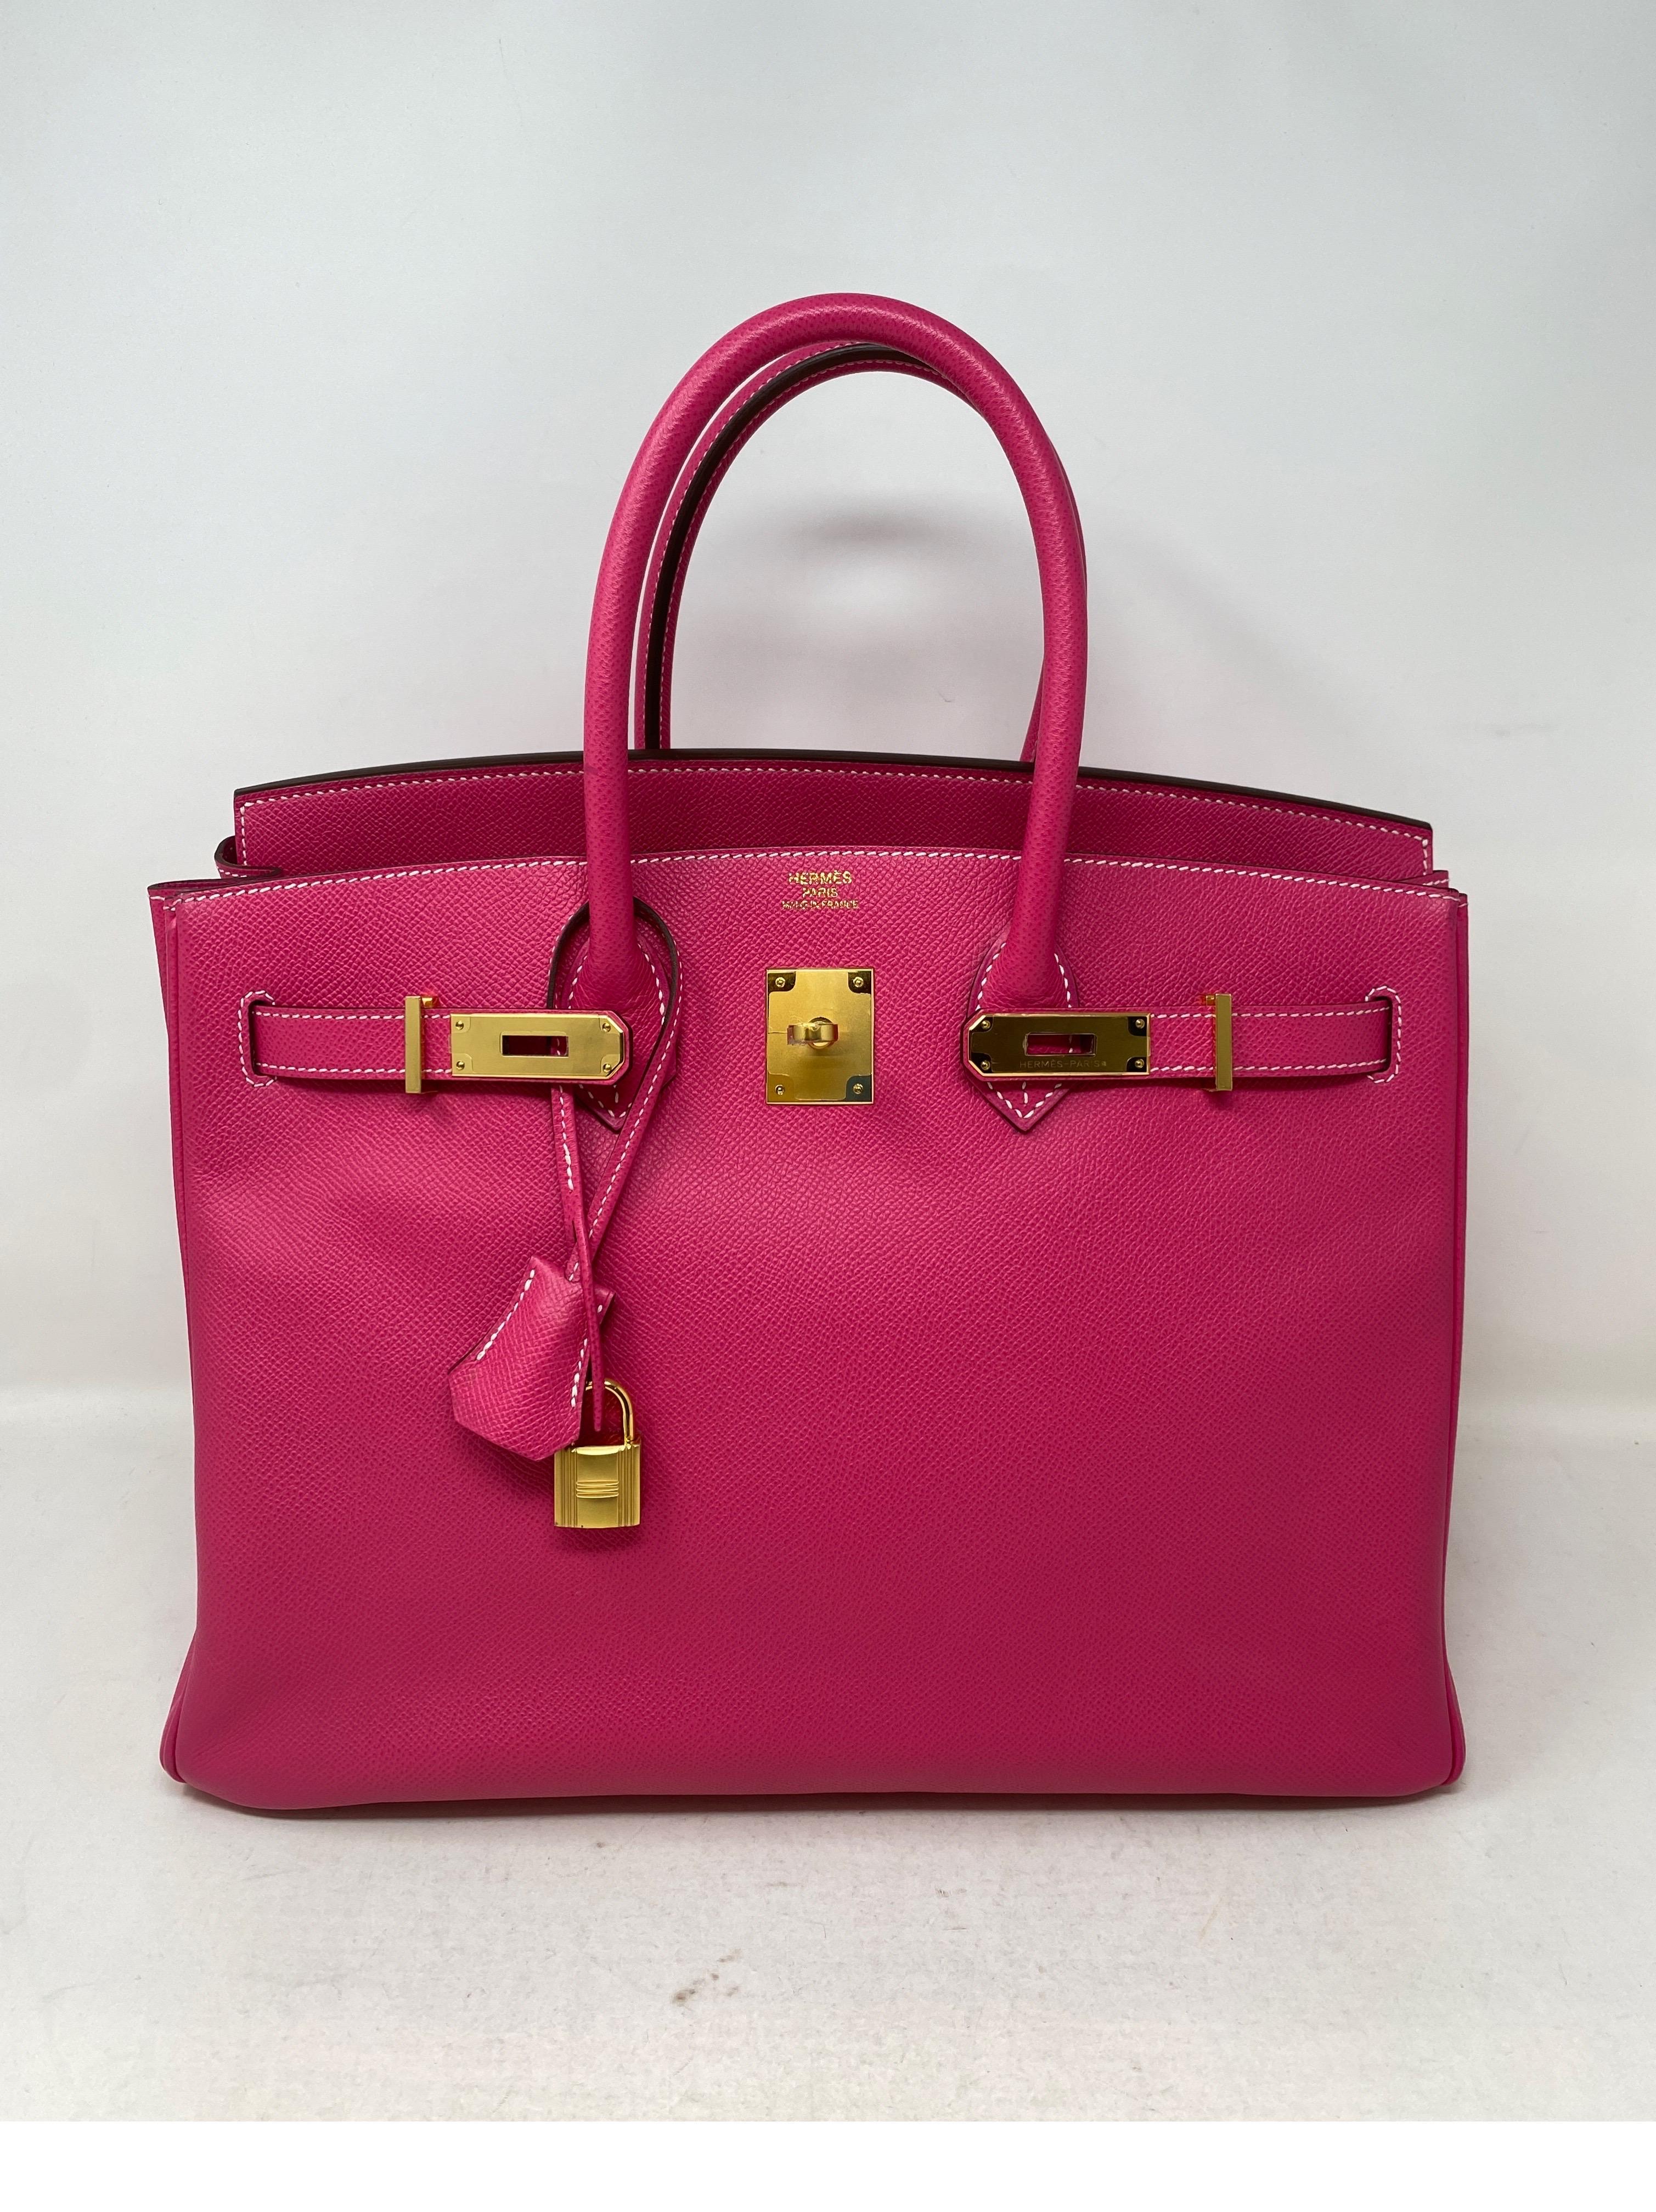 Hermes Rose Tyrien Pink Birkin 35 Bag. Stunning hot pink color bag with gold hardware. Excellent like new condition. Still has plastic on hardware. Epsom leather. Beautiful bag. Includes clochette, lock, keys and dust cover. Guaranteed authentic. 